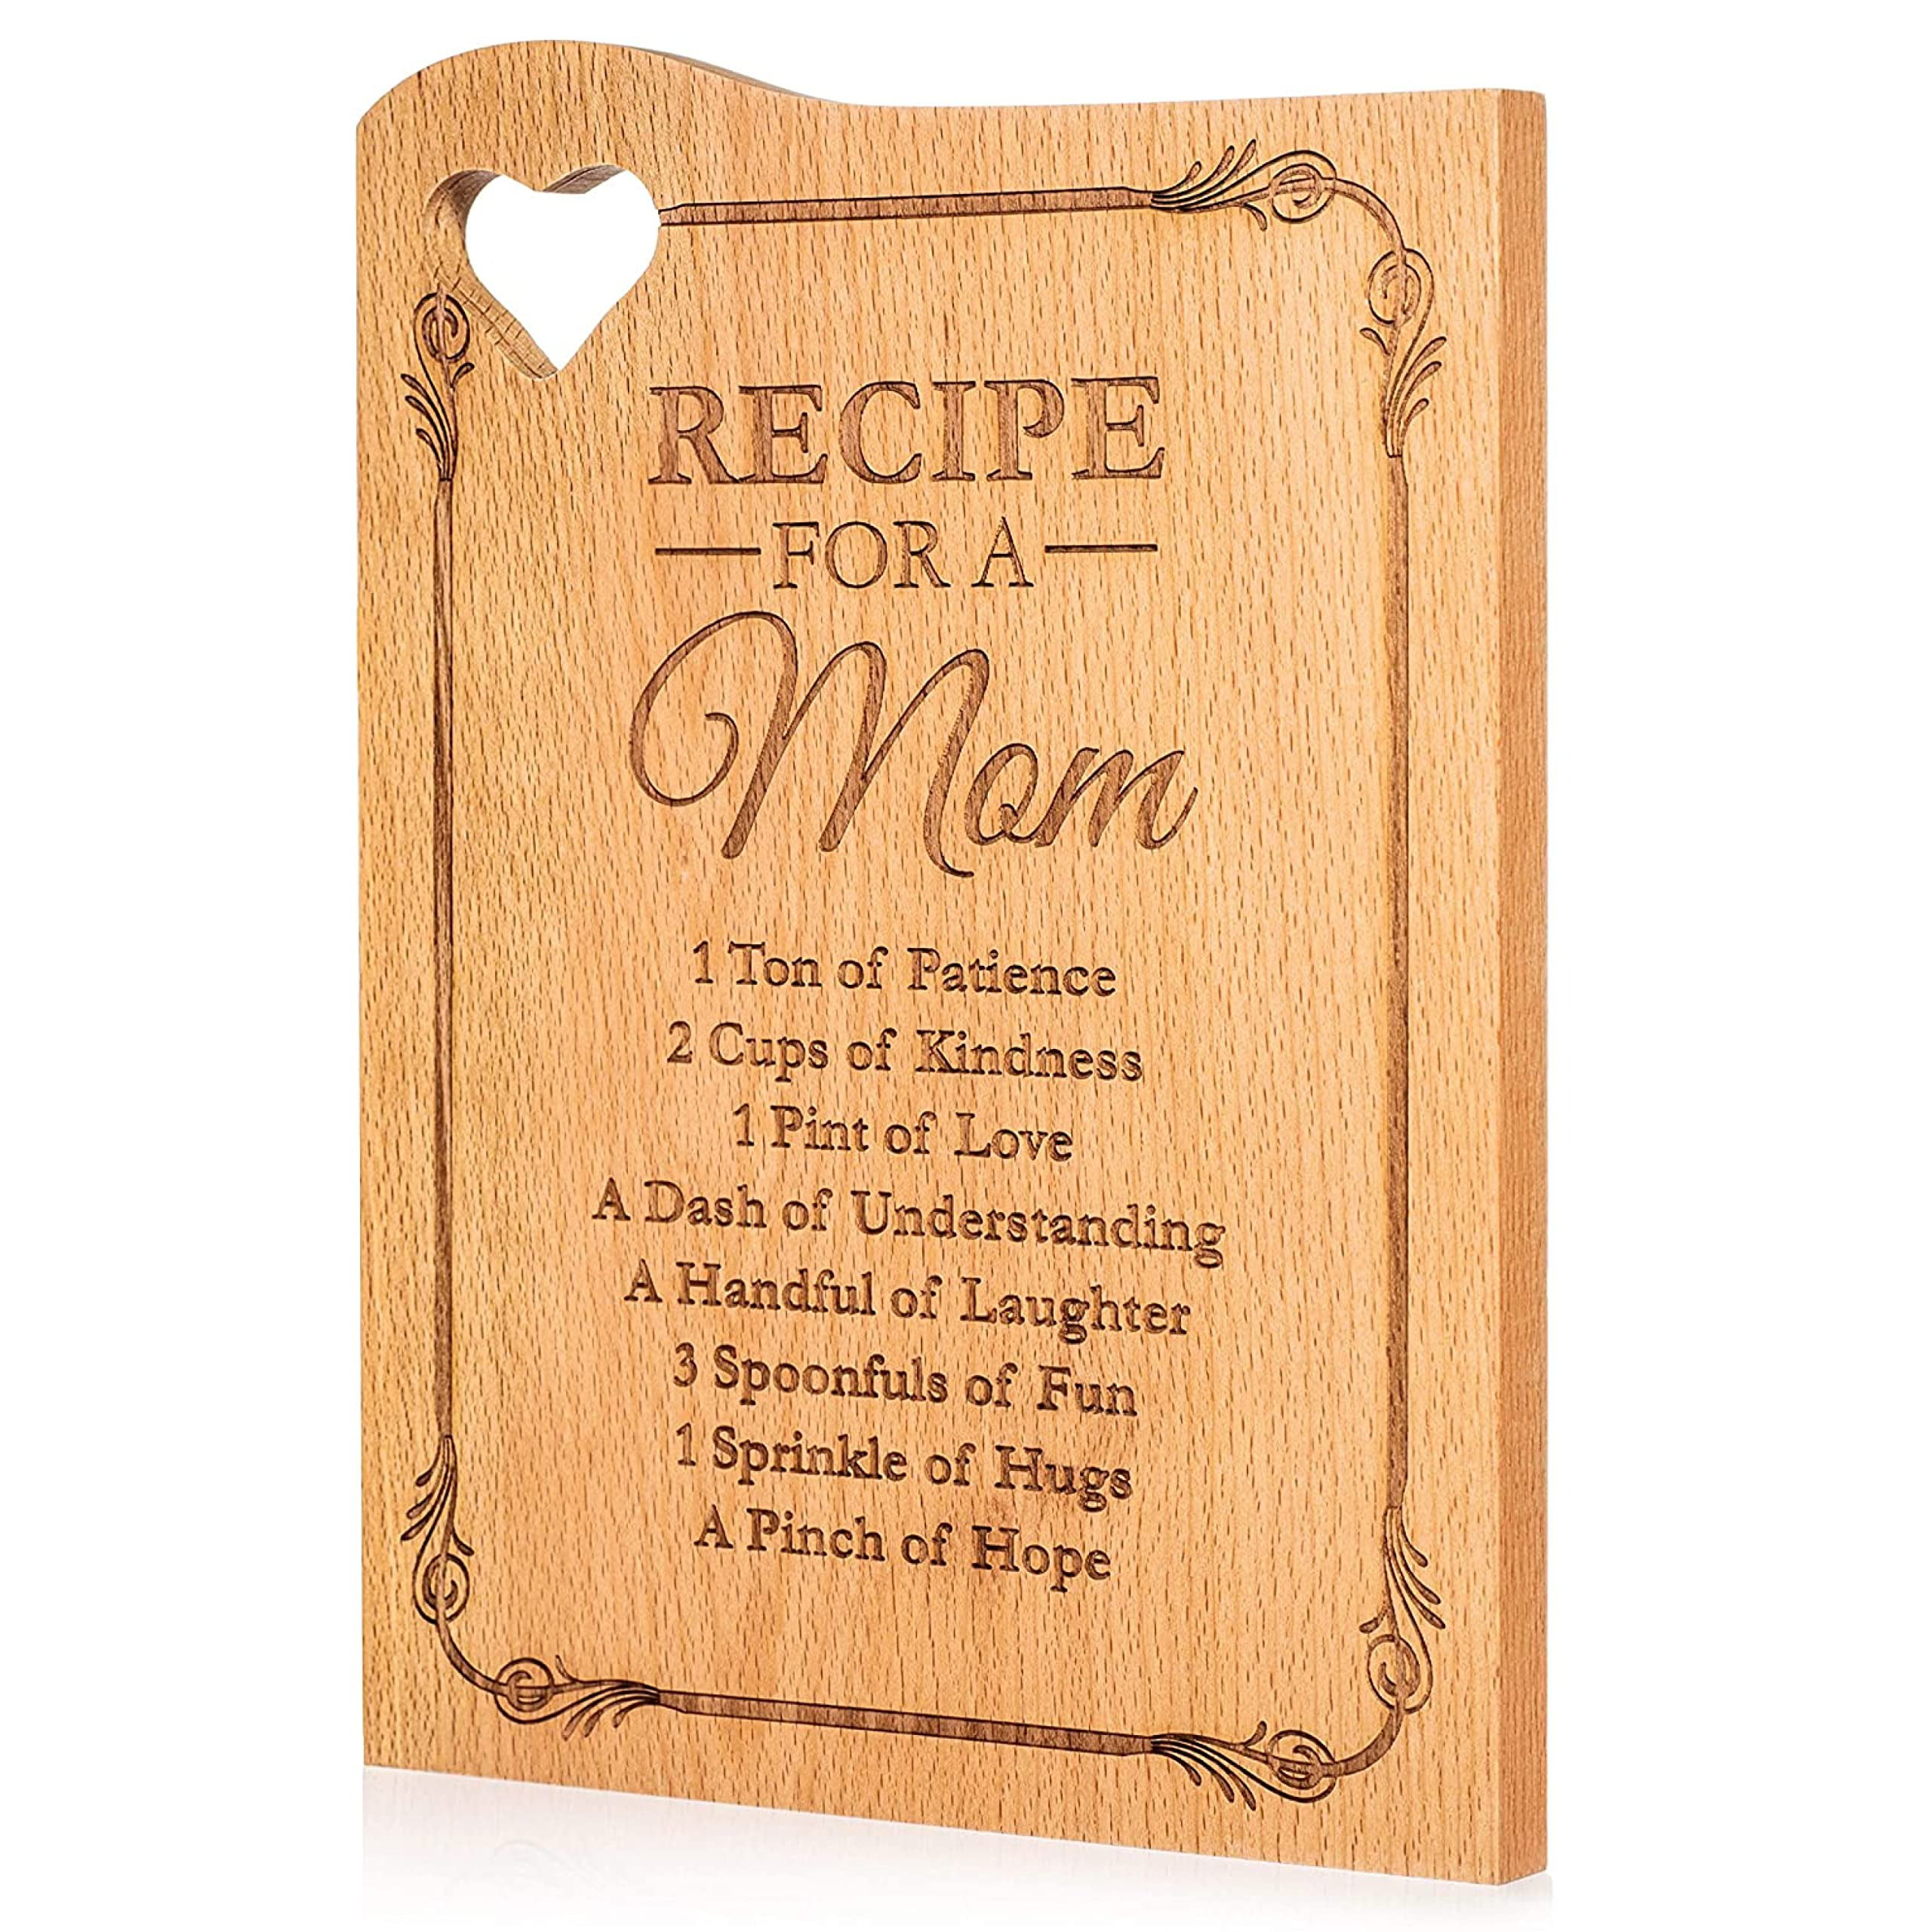 Trinx Wooden Cutting Boards For Mom - Engraved With Mother''s Poem -  Kitchen Cutting Board Gift With A Heart Shaped Cut Out - Kitchen Presents  For Mothers Day Gifts - Mom Gifts